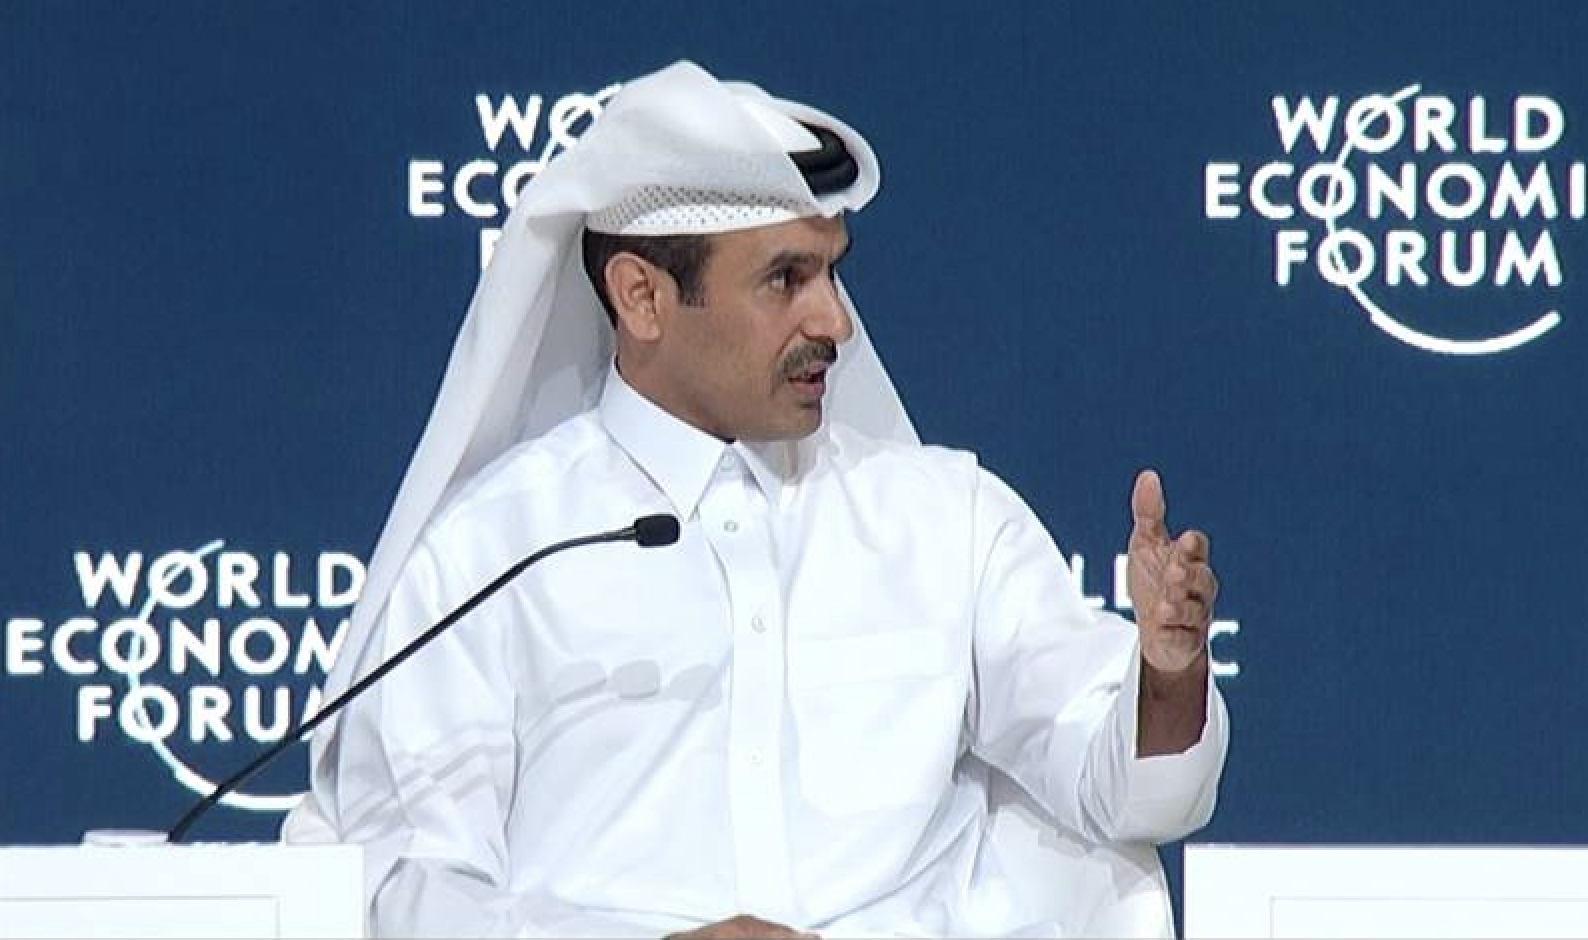 Qatar’s energy minister urges responsible use of oil, gas resources at World Economic Forum panel